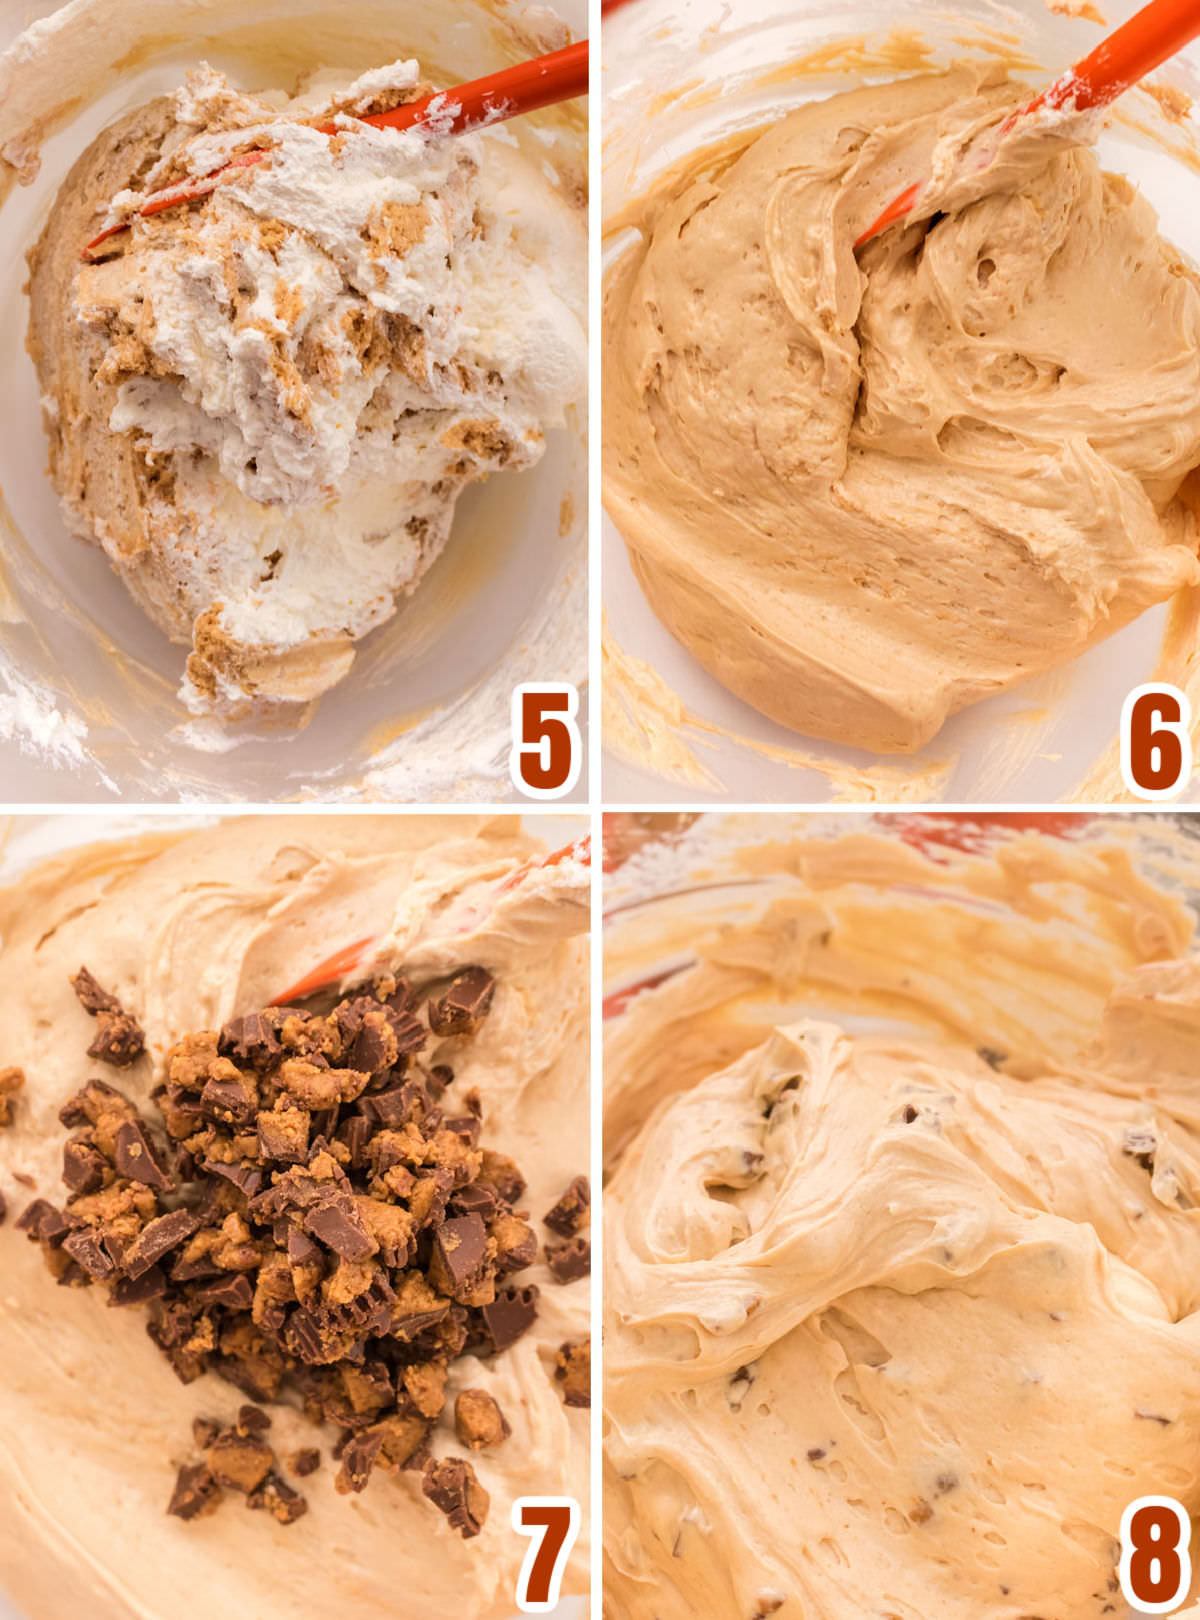 Collage image showing how to fold the whipped cream and the Peanut Butter Cup pieces into the cheesecake filling.